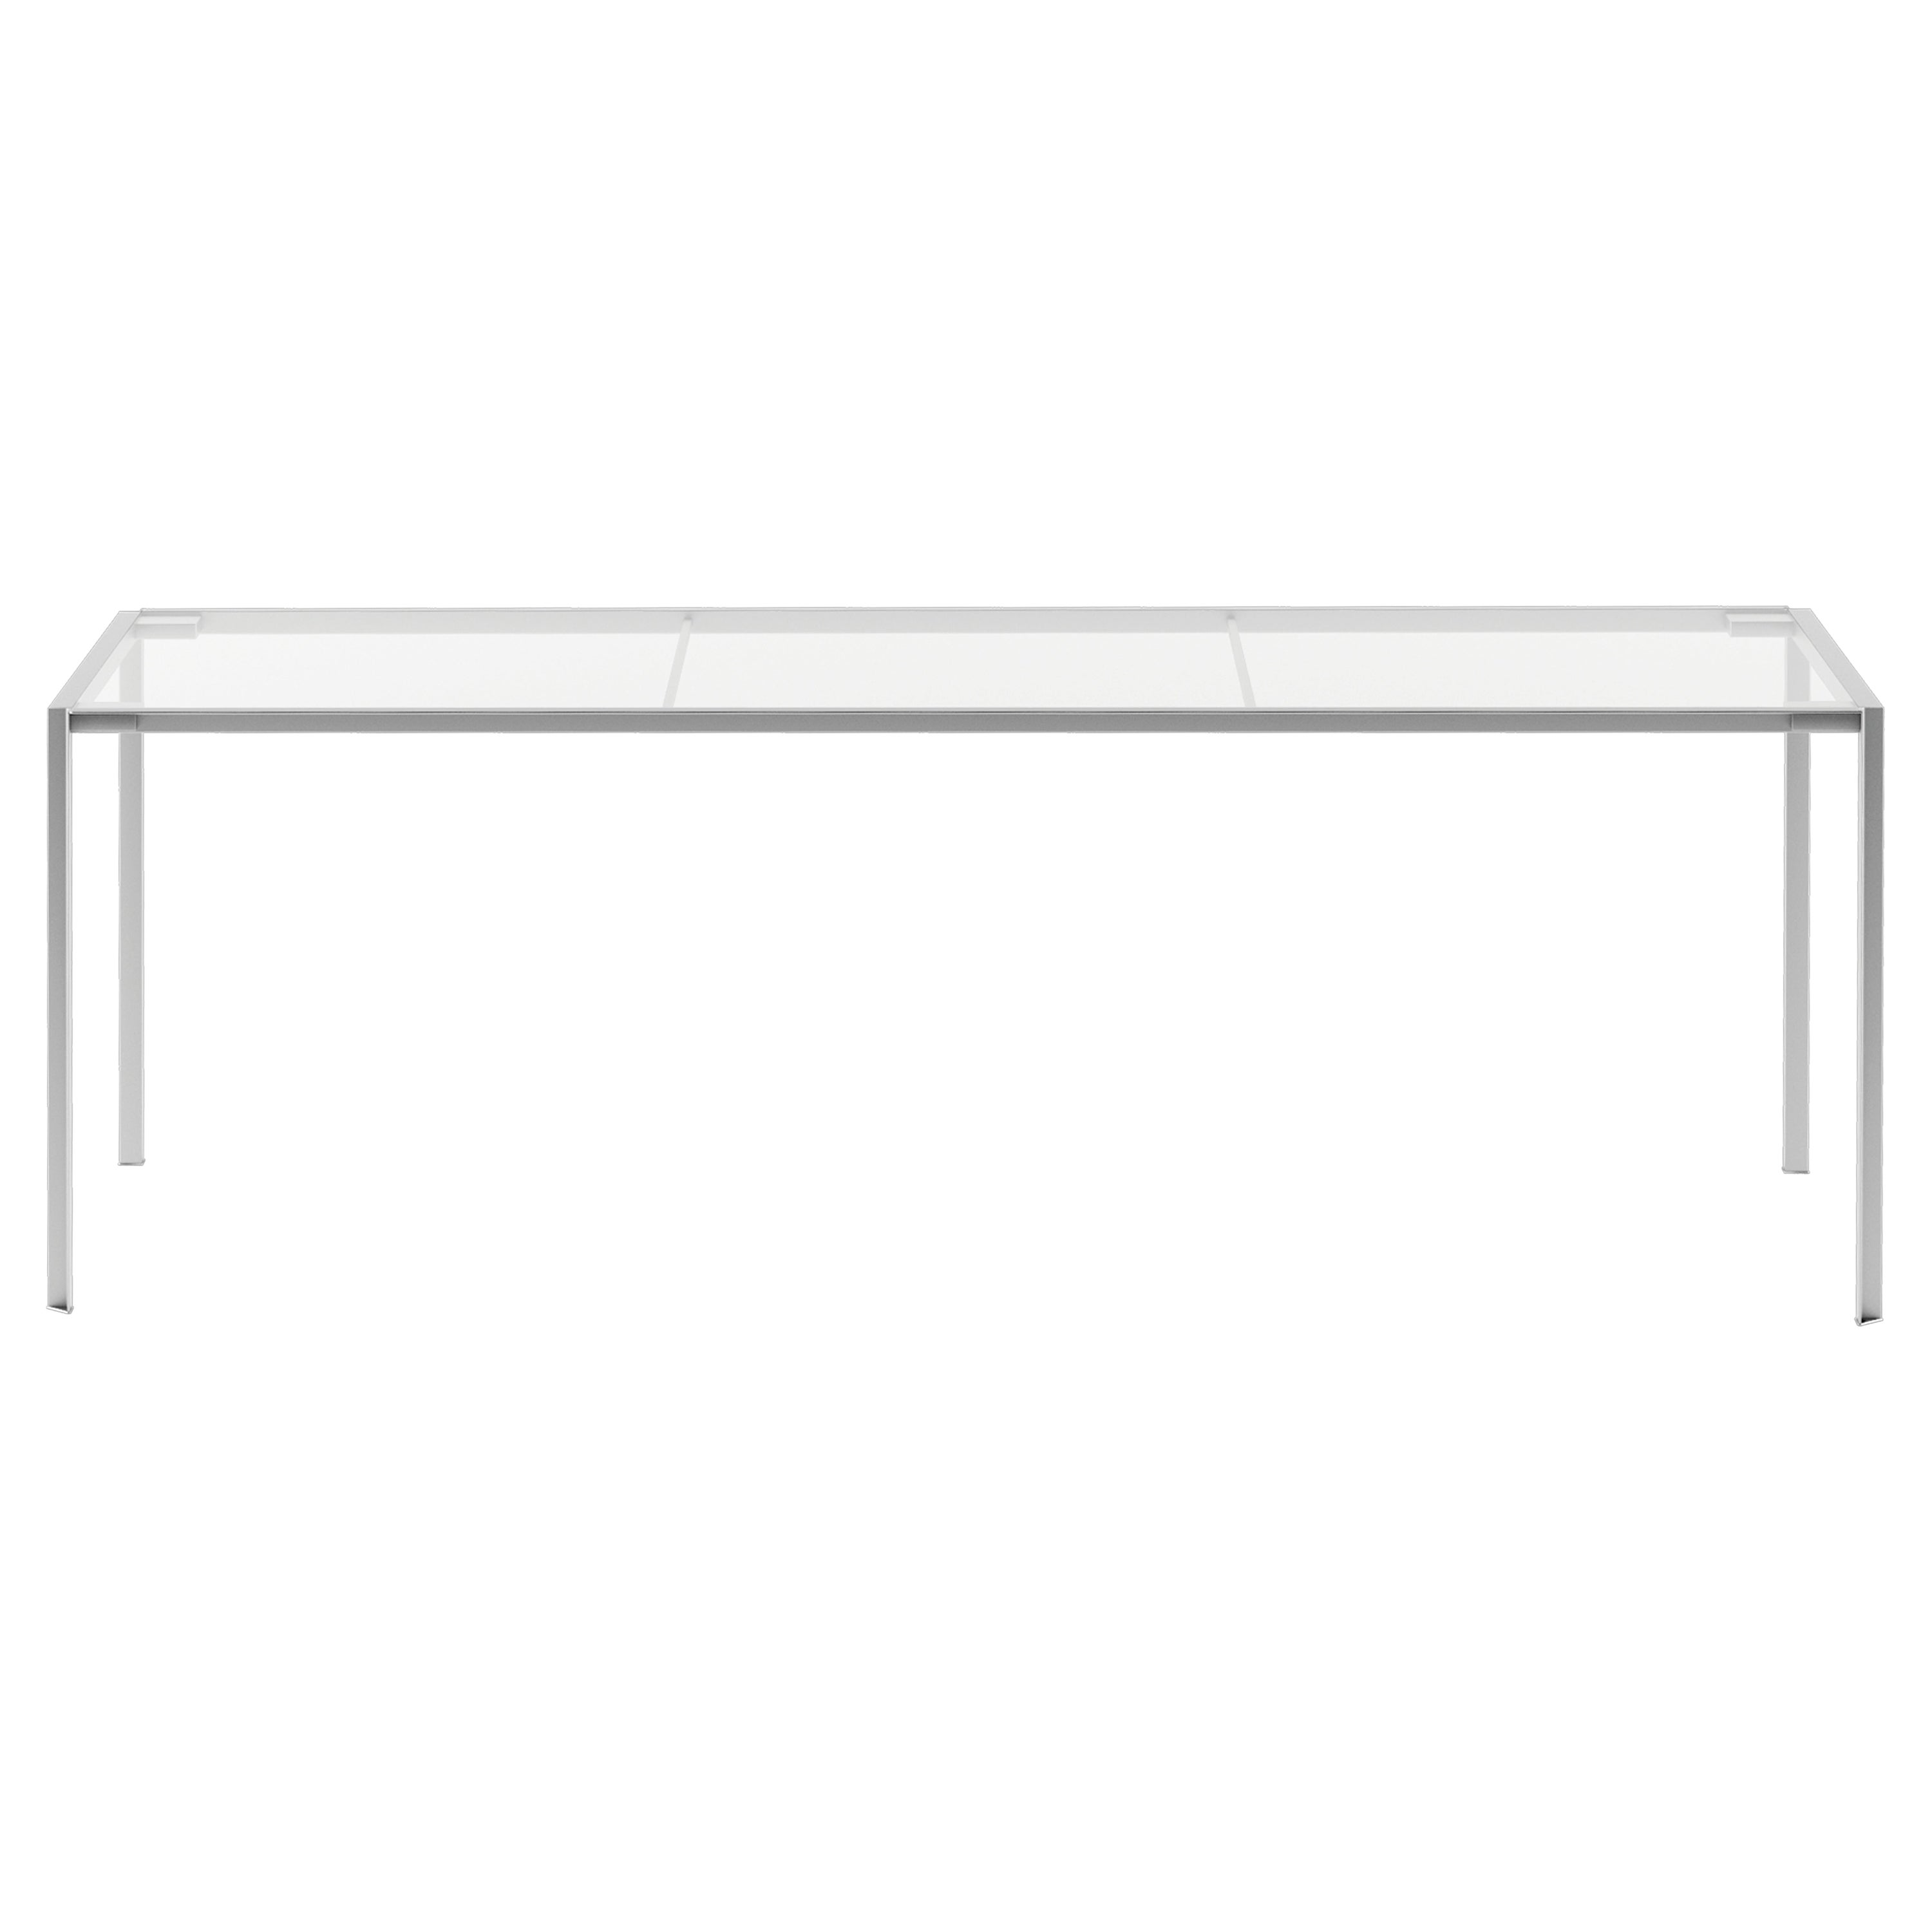 Alias 222_O Green Table with Brushed Stainless Steel Frame and Glass Top For Sale